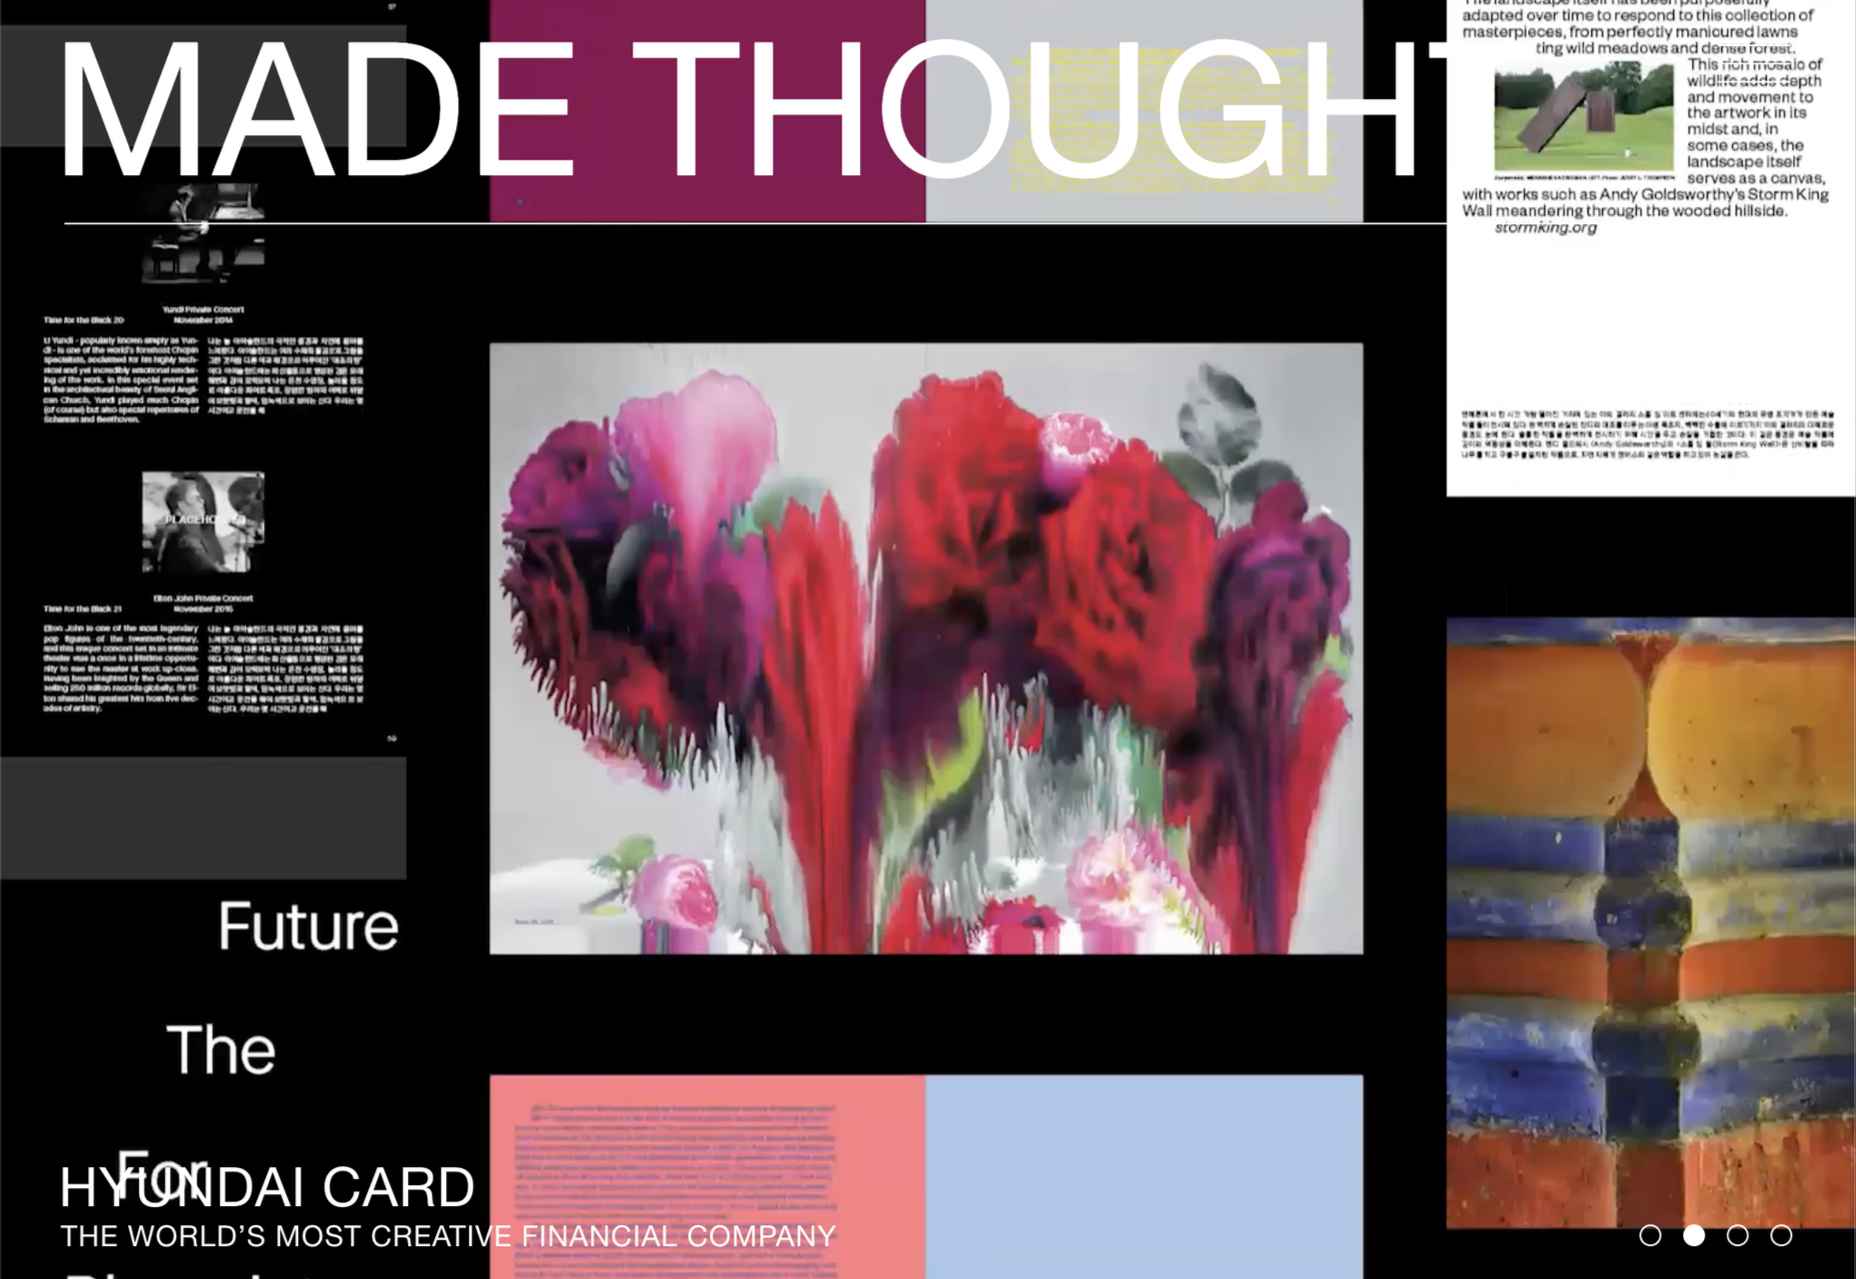 038 madethought